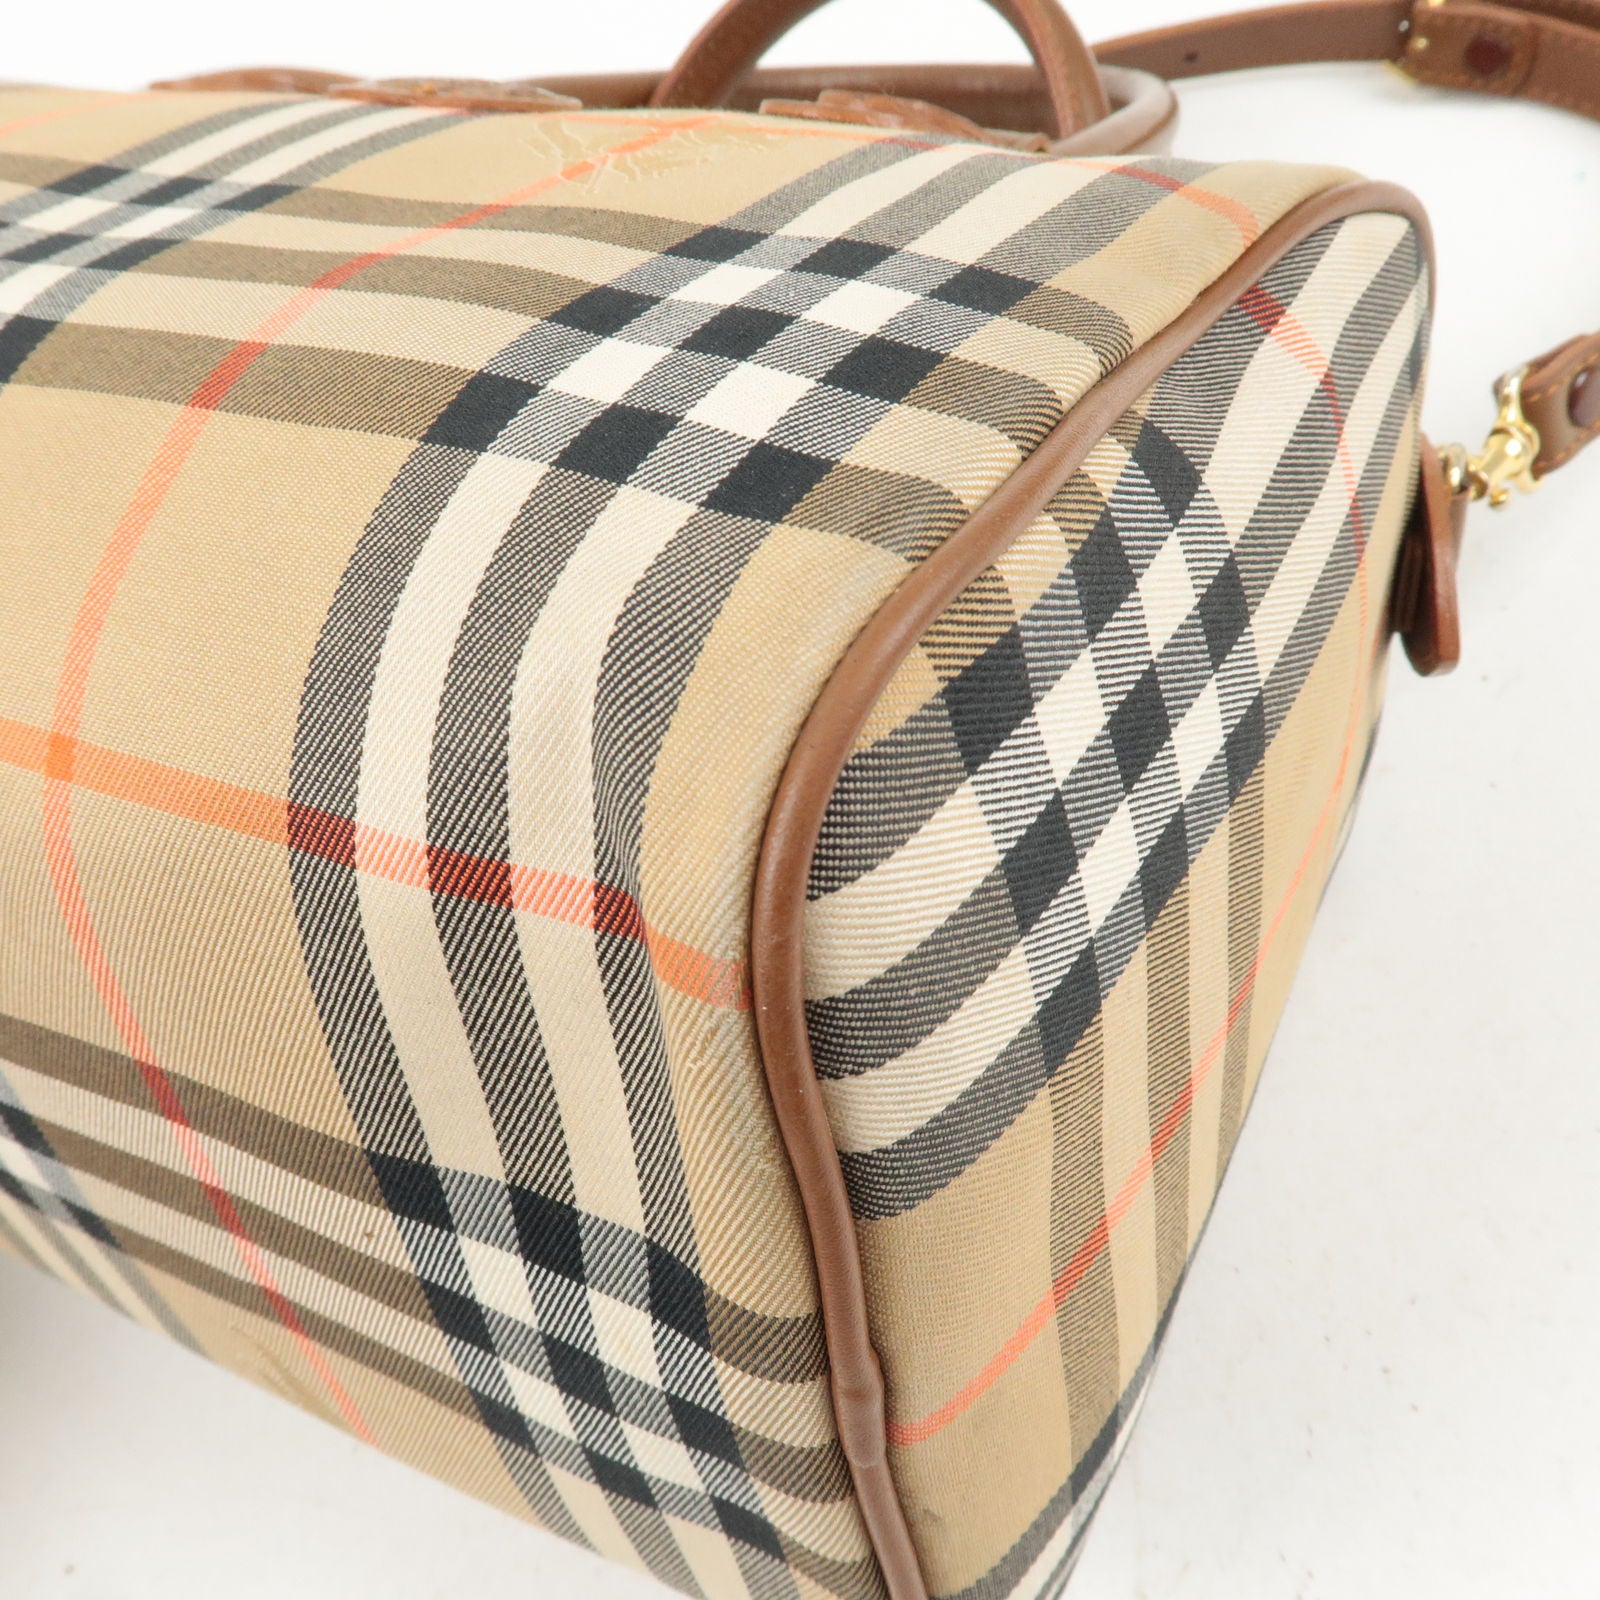 Burberry Authentic Nova Check Boston Bag Gold Hardware Used From Japan